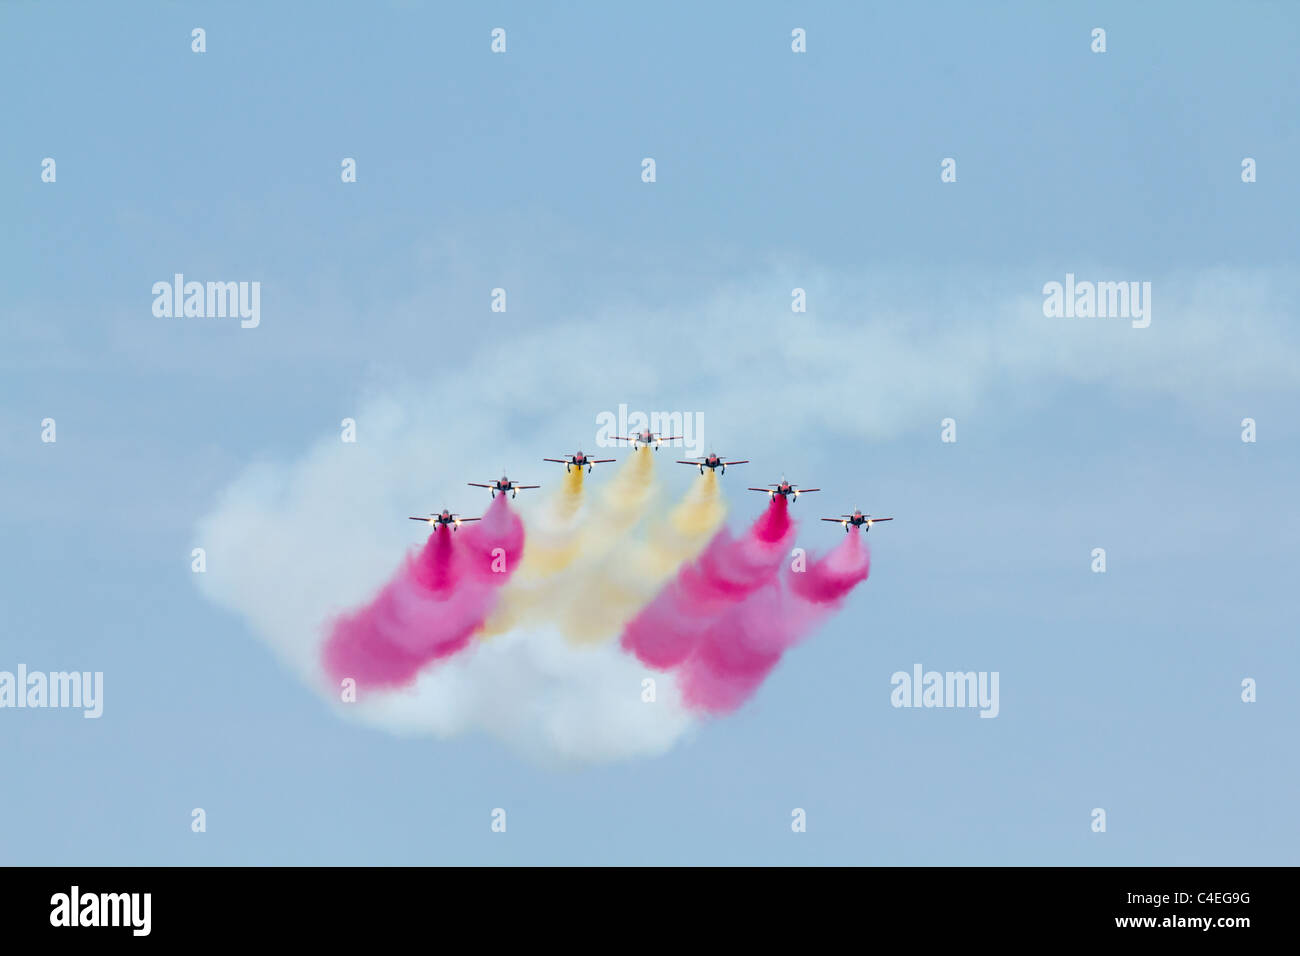 A team of seven airplanes on an air show releasing red and yellow smoke Stock Photo